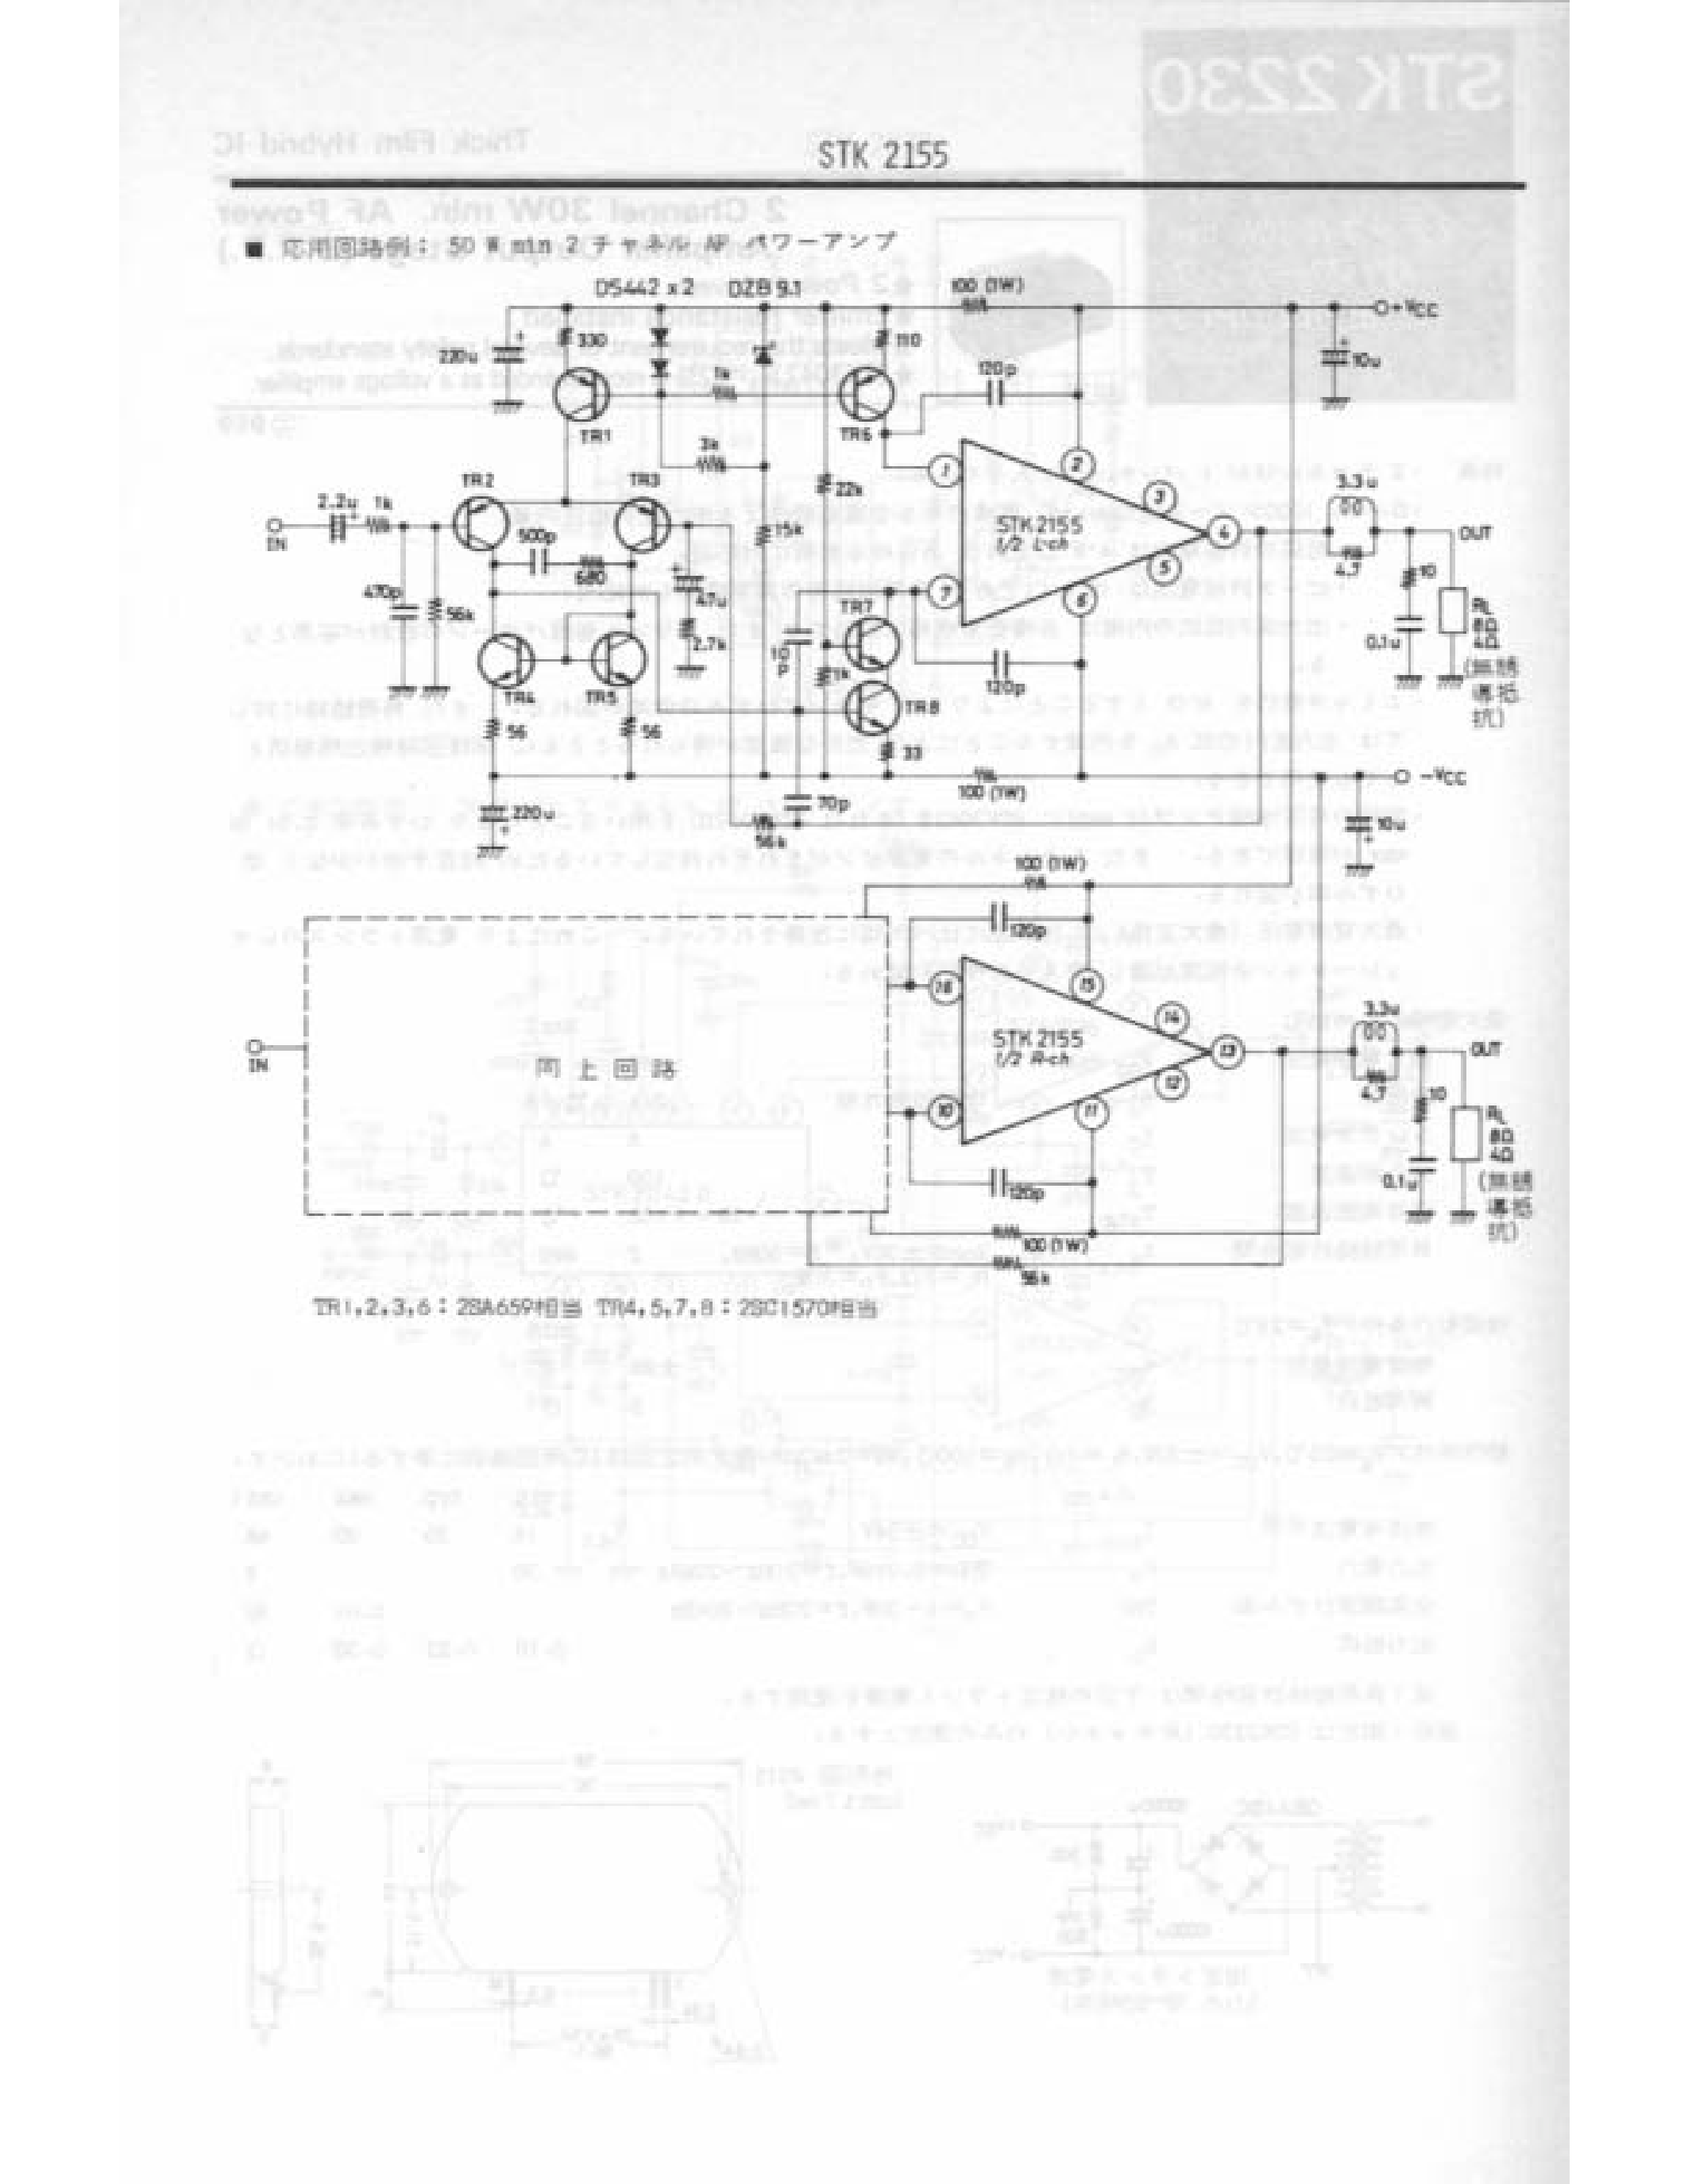 Datasheet STK2155 - 2 CHANNEL 50W MIN AF POWER AMPLIFIER OUTPUT STAGE page 2